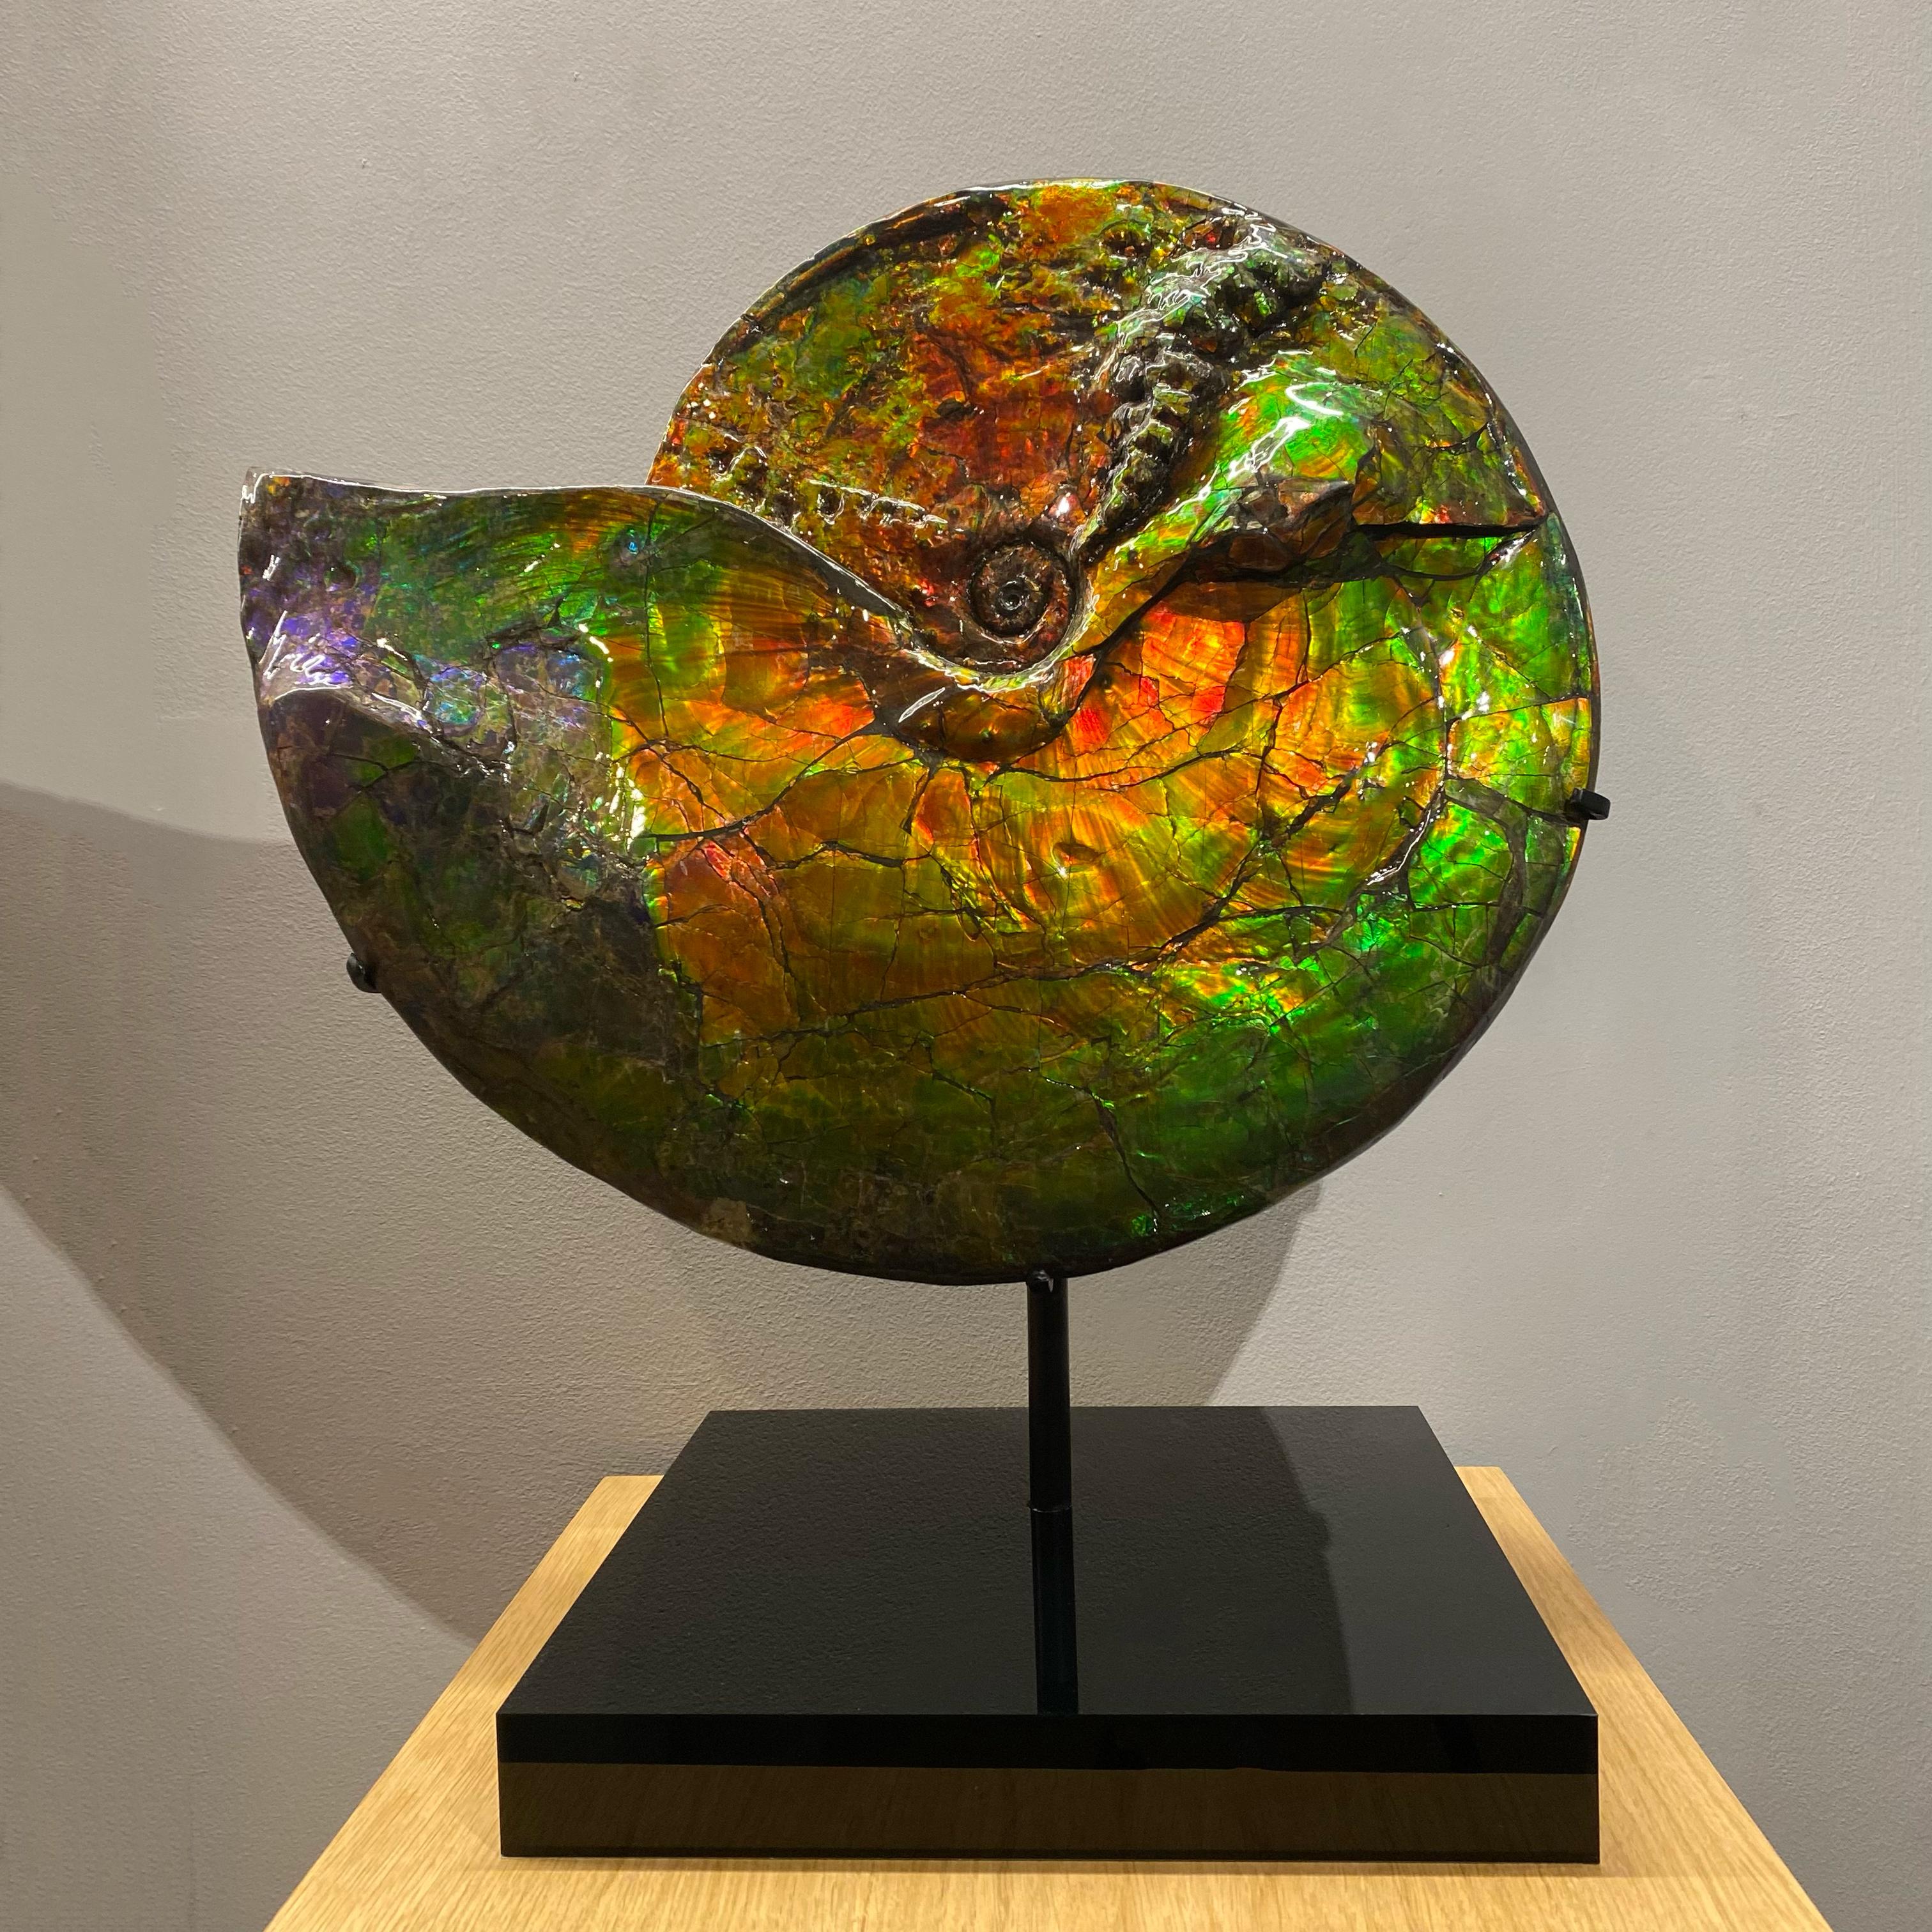 Rare Iridescent Ammonite

'Placenticeras intercalare'
Upper Cretaceous (75-72 million years ago)
Measures: 49.5 x 42 x 5 cm
Alberta, Canada 

Known as ‘Ammolite’, the shimmering, metallic colours were caused by the combination of millions of years